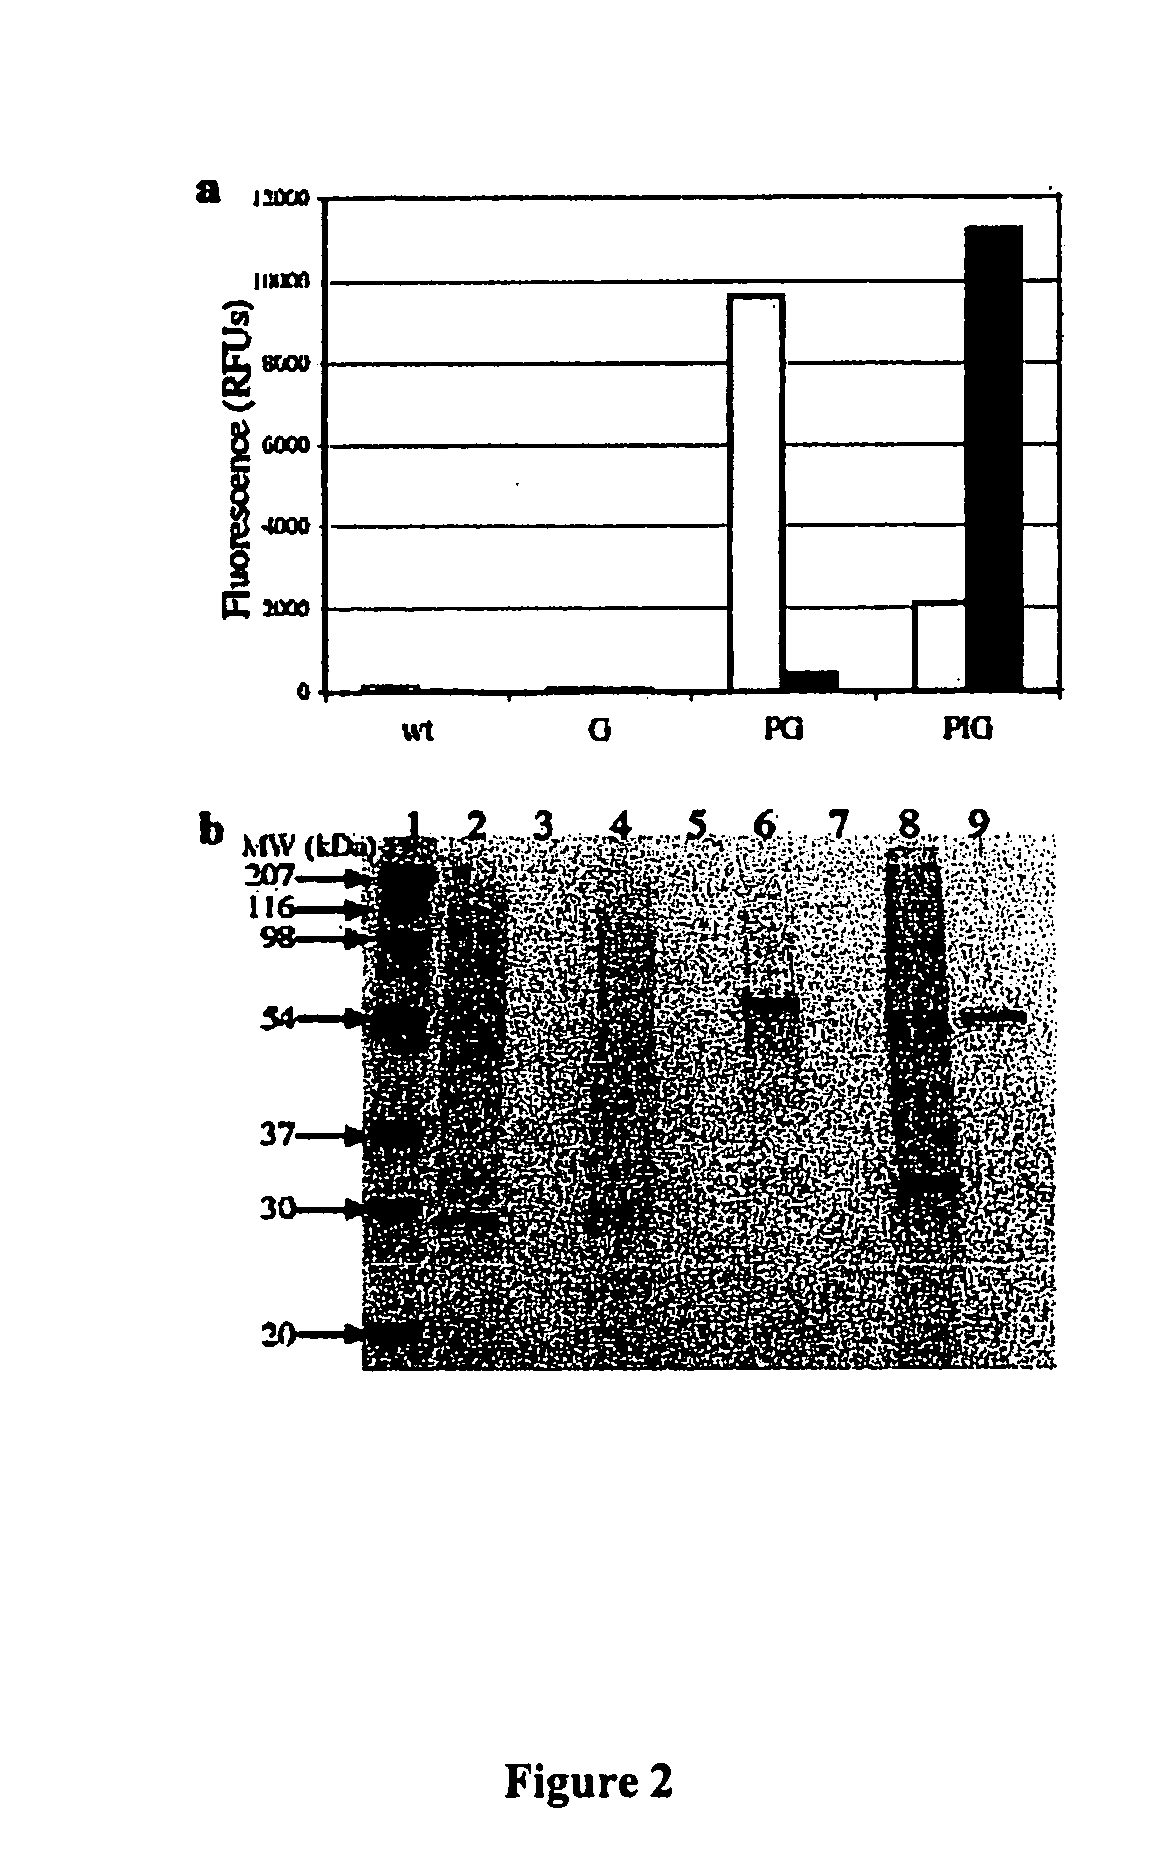 Intein-mediated protein purification using in vivo expression of an aggregator protein